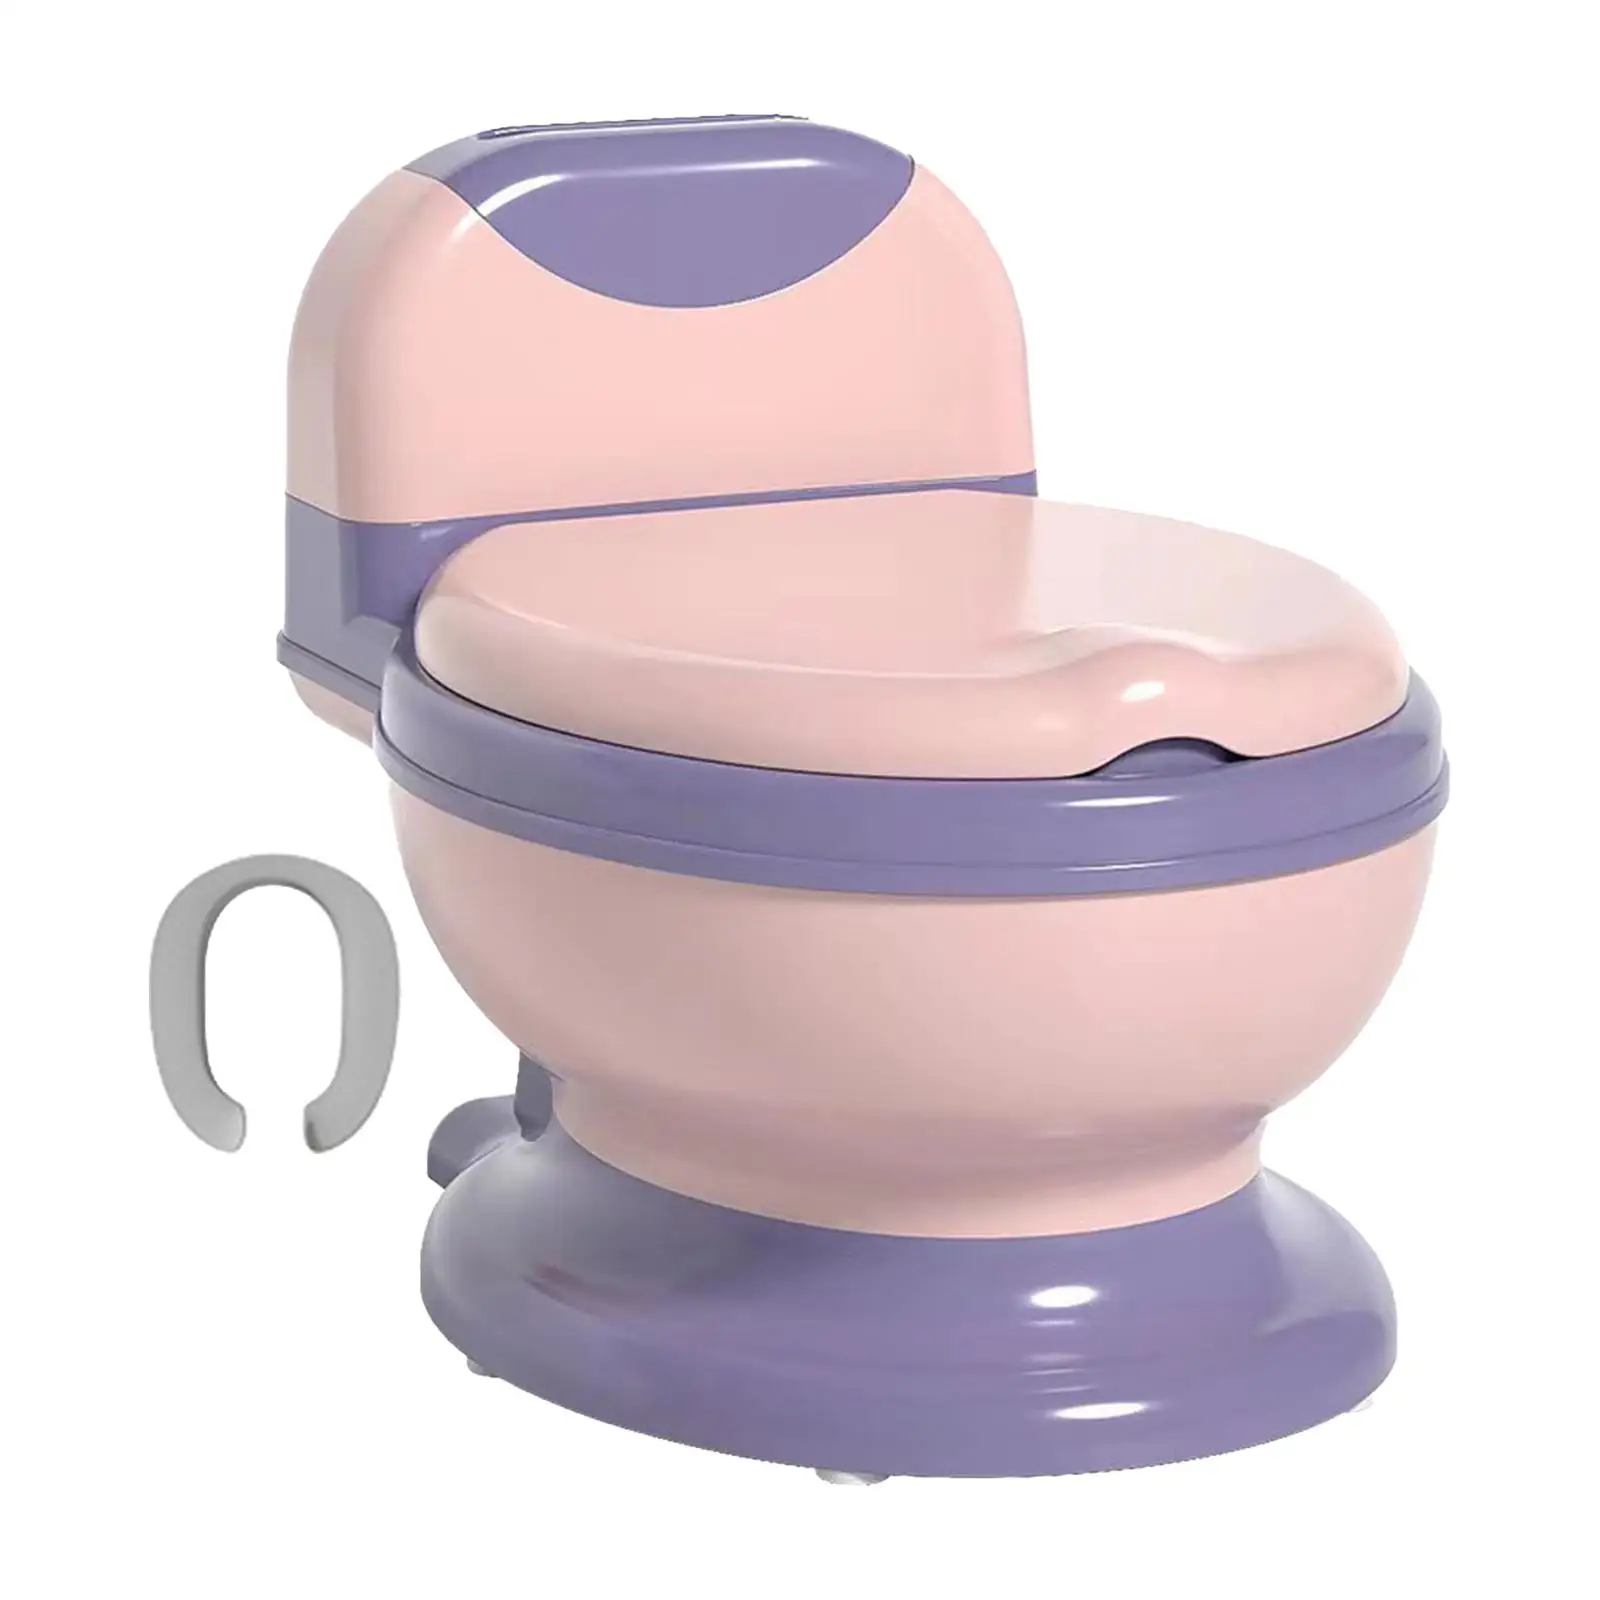 Potty Train Toilet Portable Toilet Training Seat Potty Seat Detachable Toddlers Potty Chair for Children Boys Girls Kids Baby